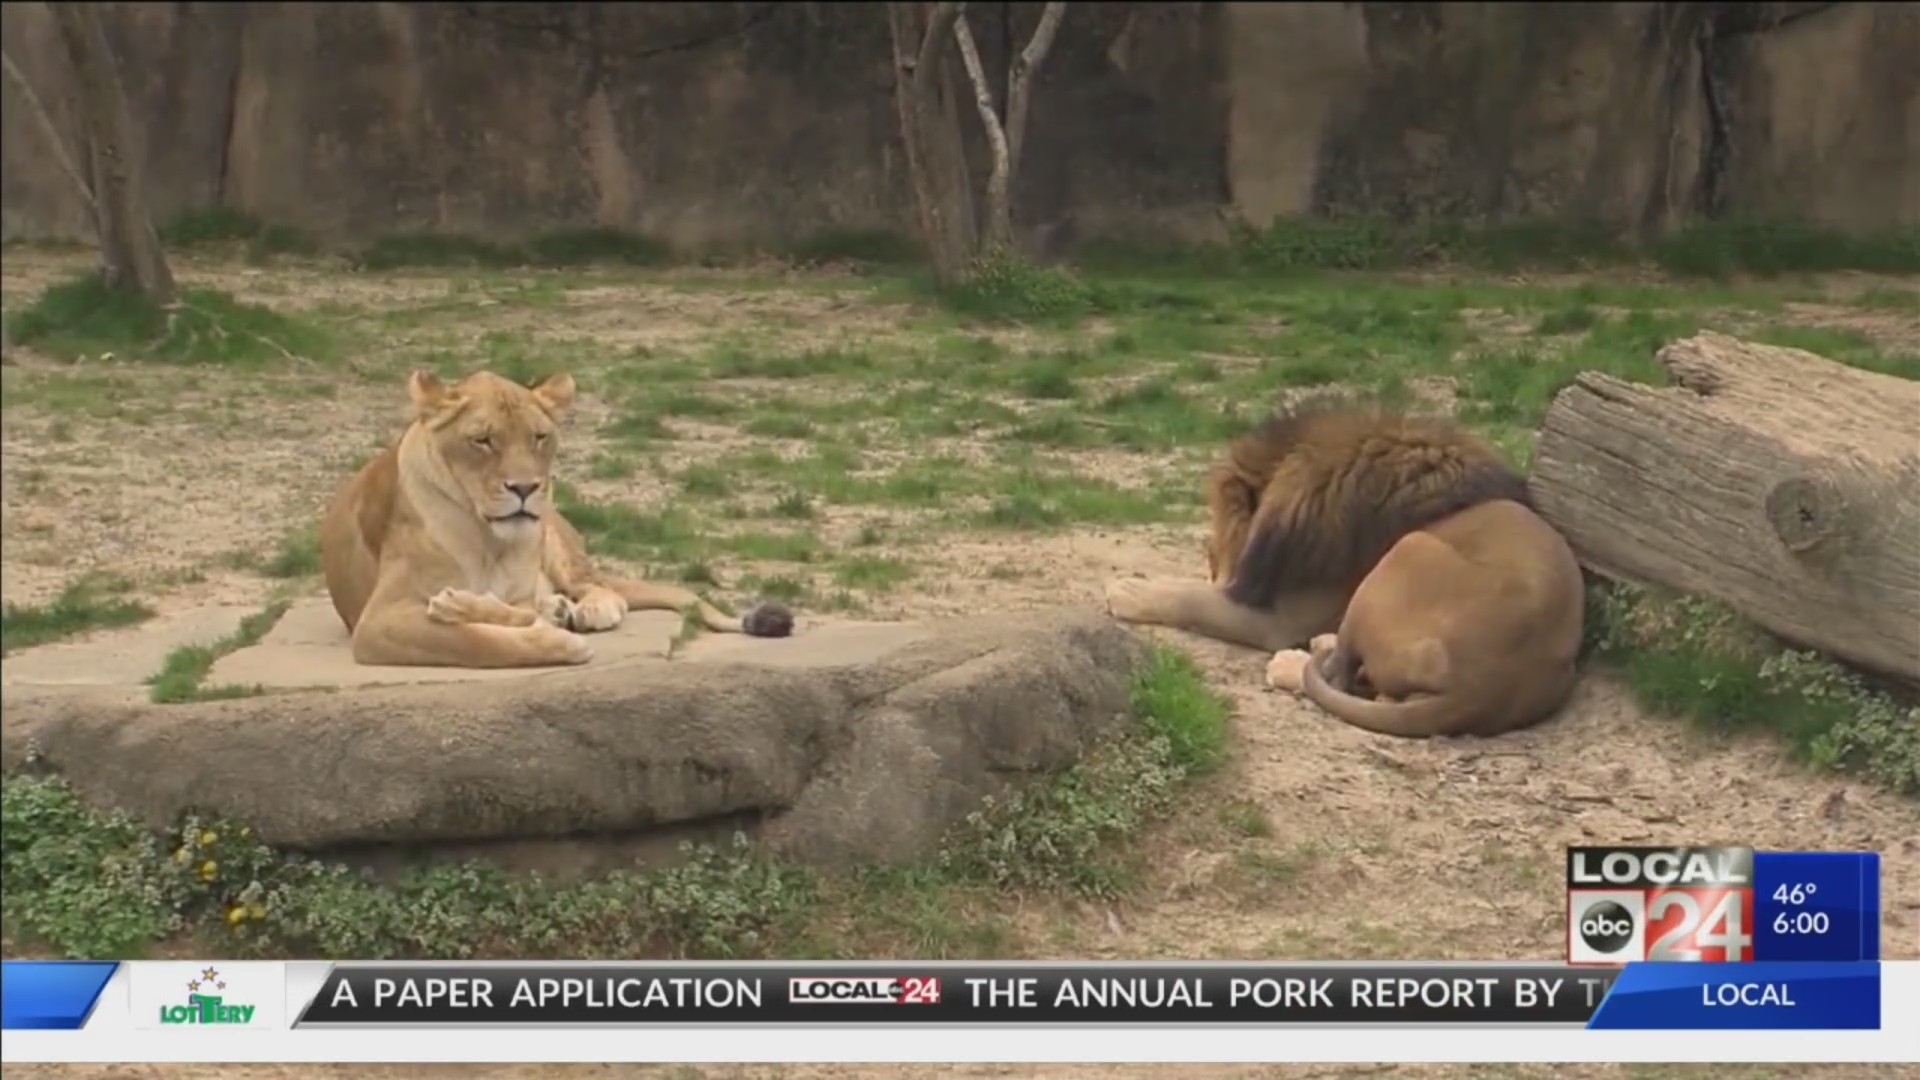 Proposed legislation would allow daytime beer and alcohol sales at Memphis Zoo